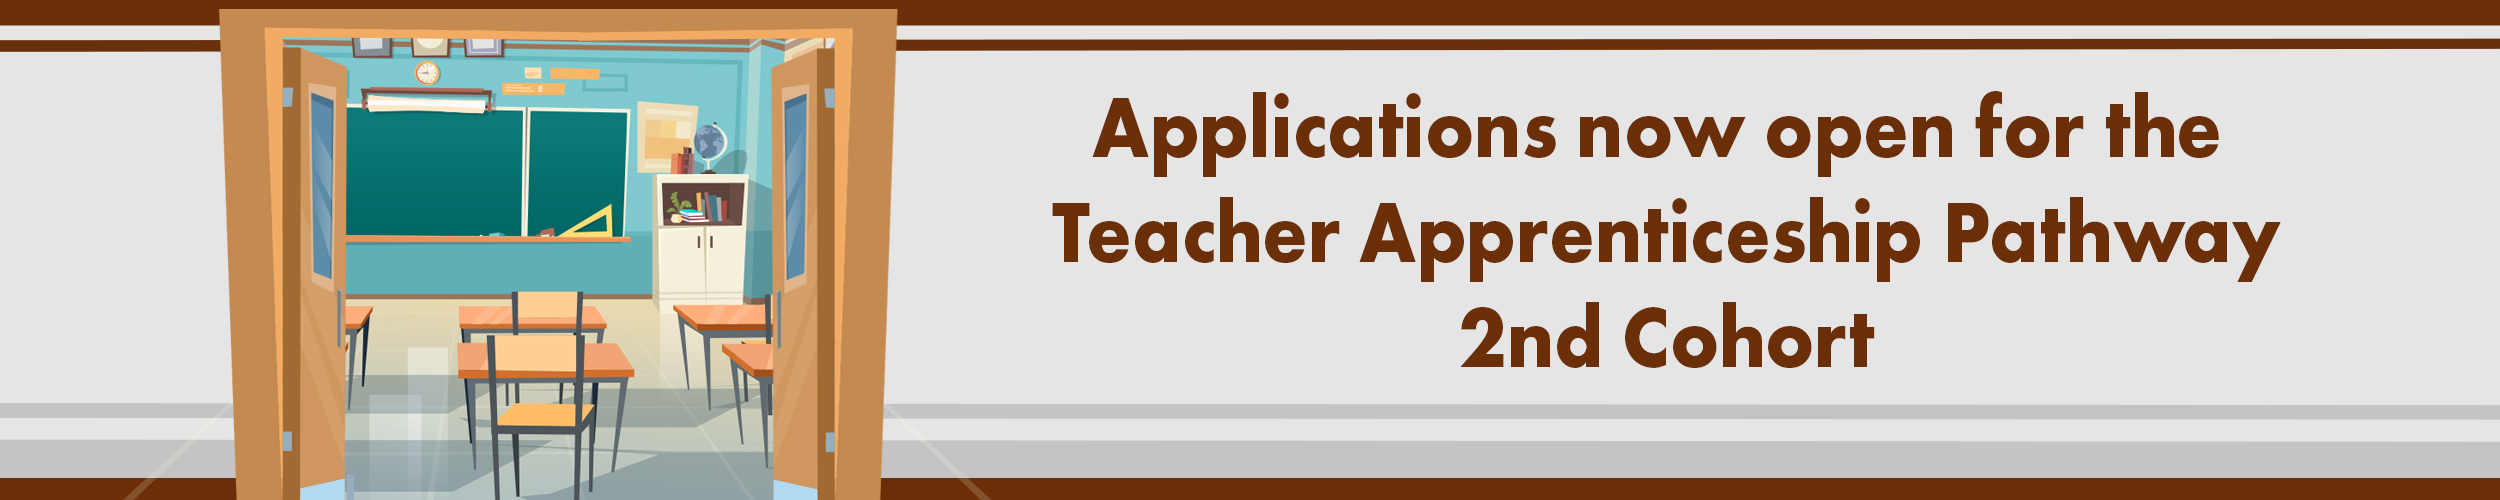 Applications now open for the Teacher Apprenticeship Pathway 2nd Cohort. Link.